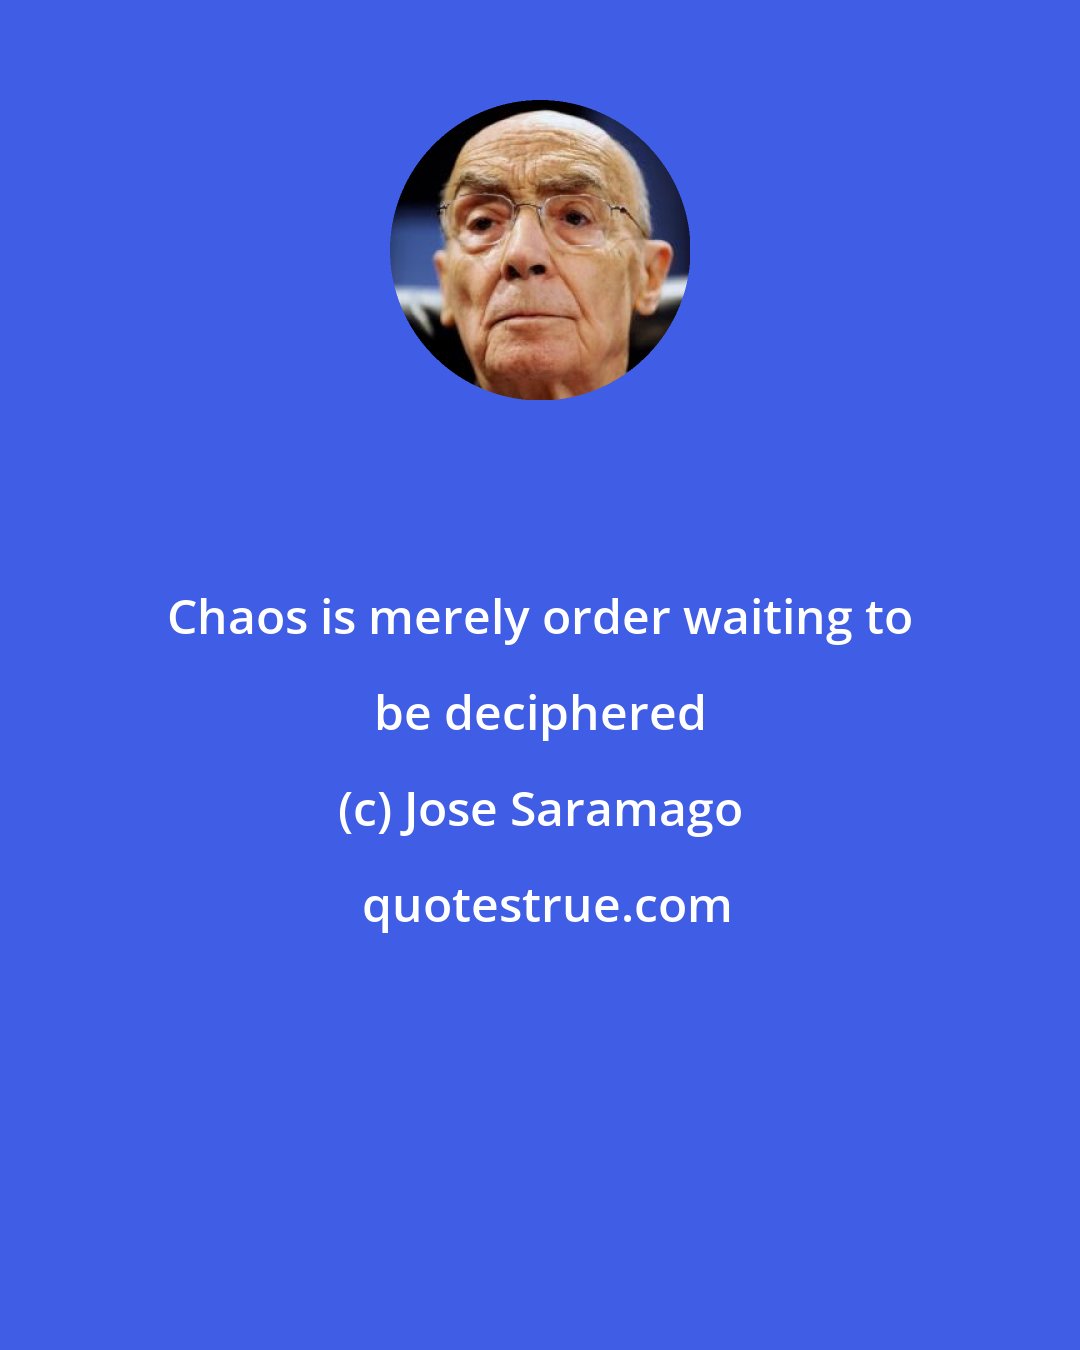 Jose Saramago: Chaos is merely order waiting to be deciphered